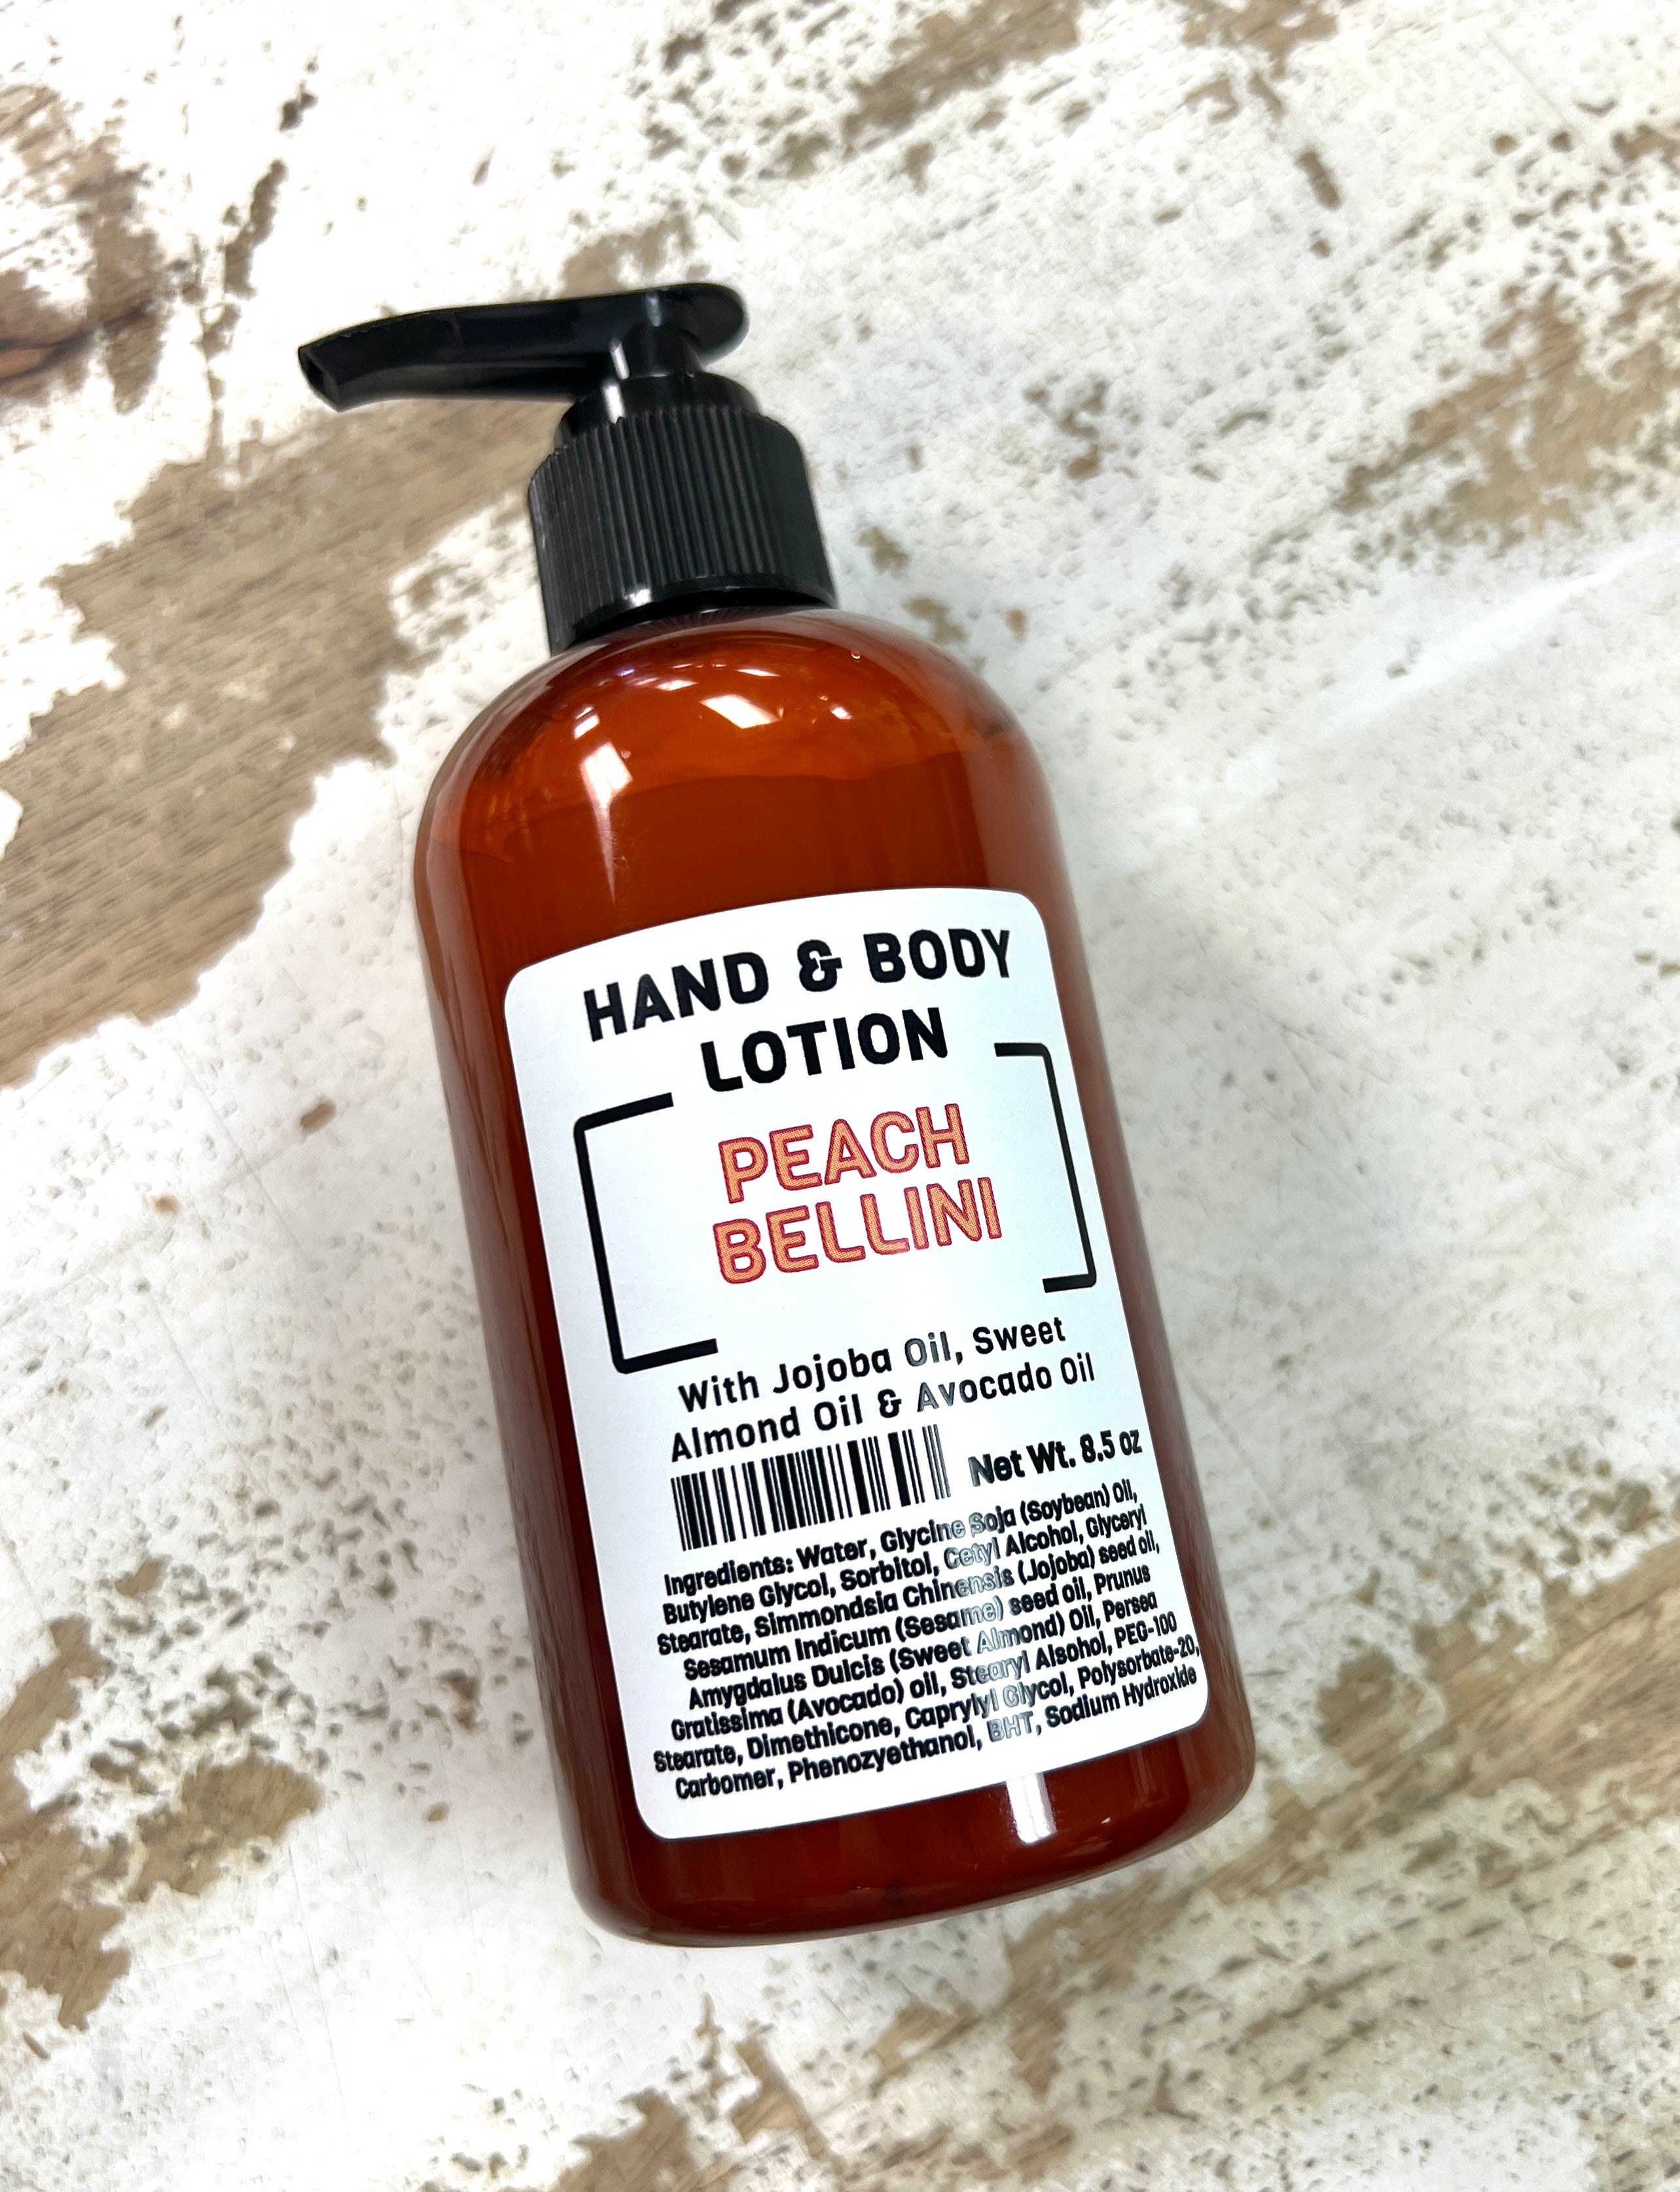 Cobalt Soap Co. Hand & Body Lotion